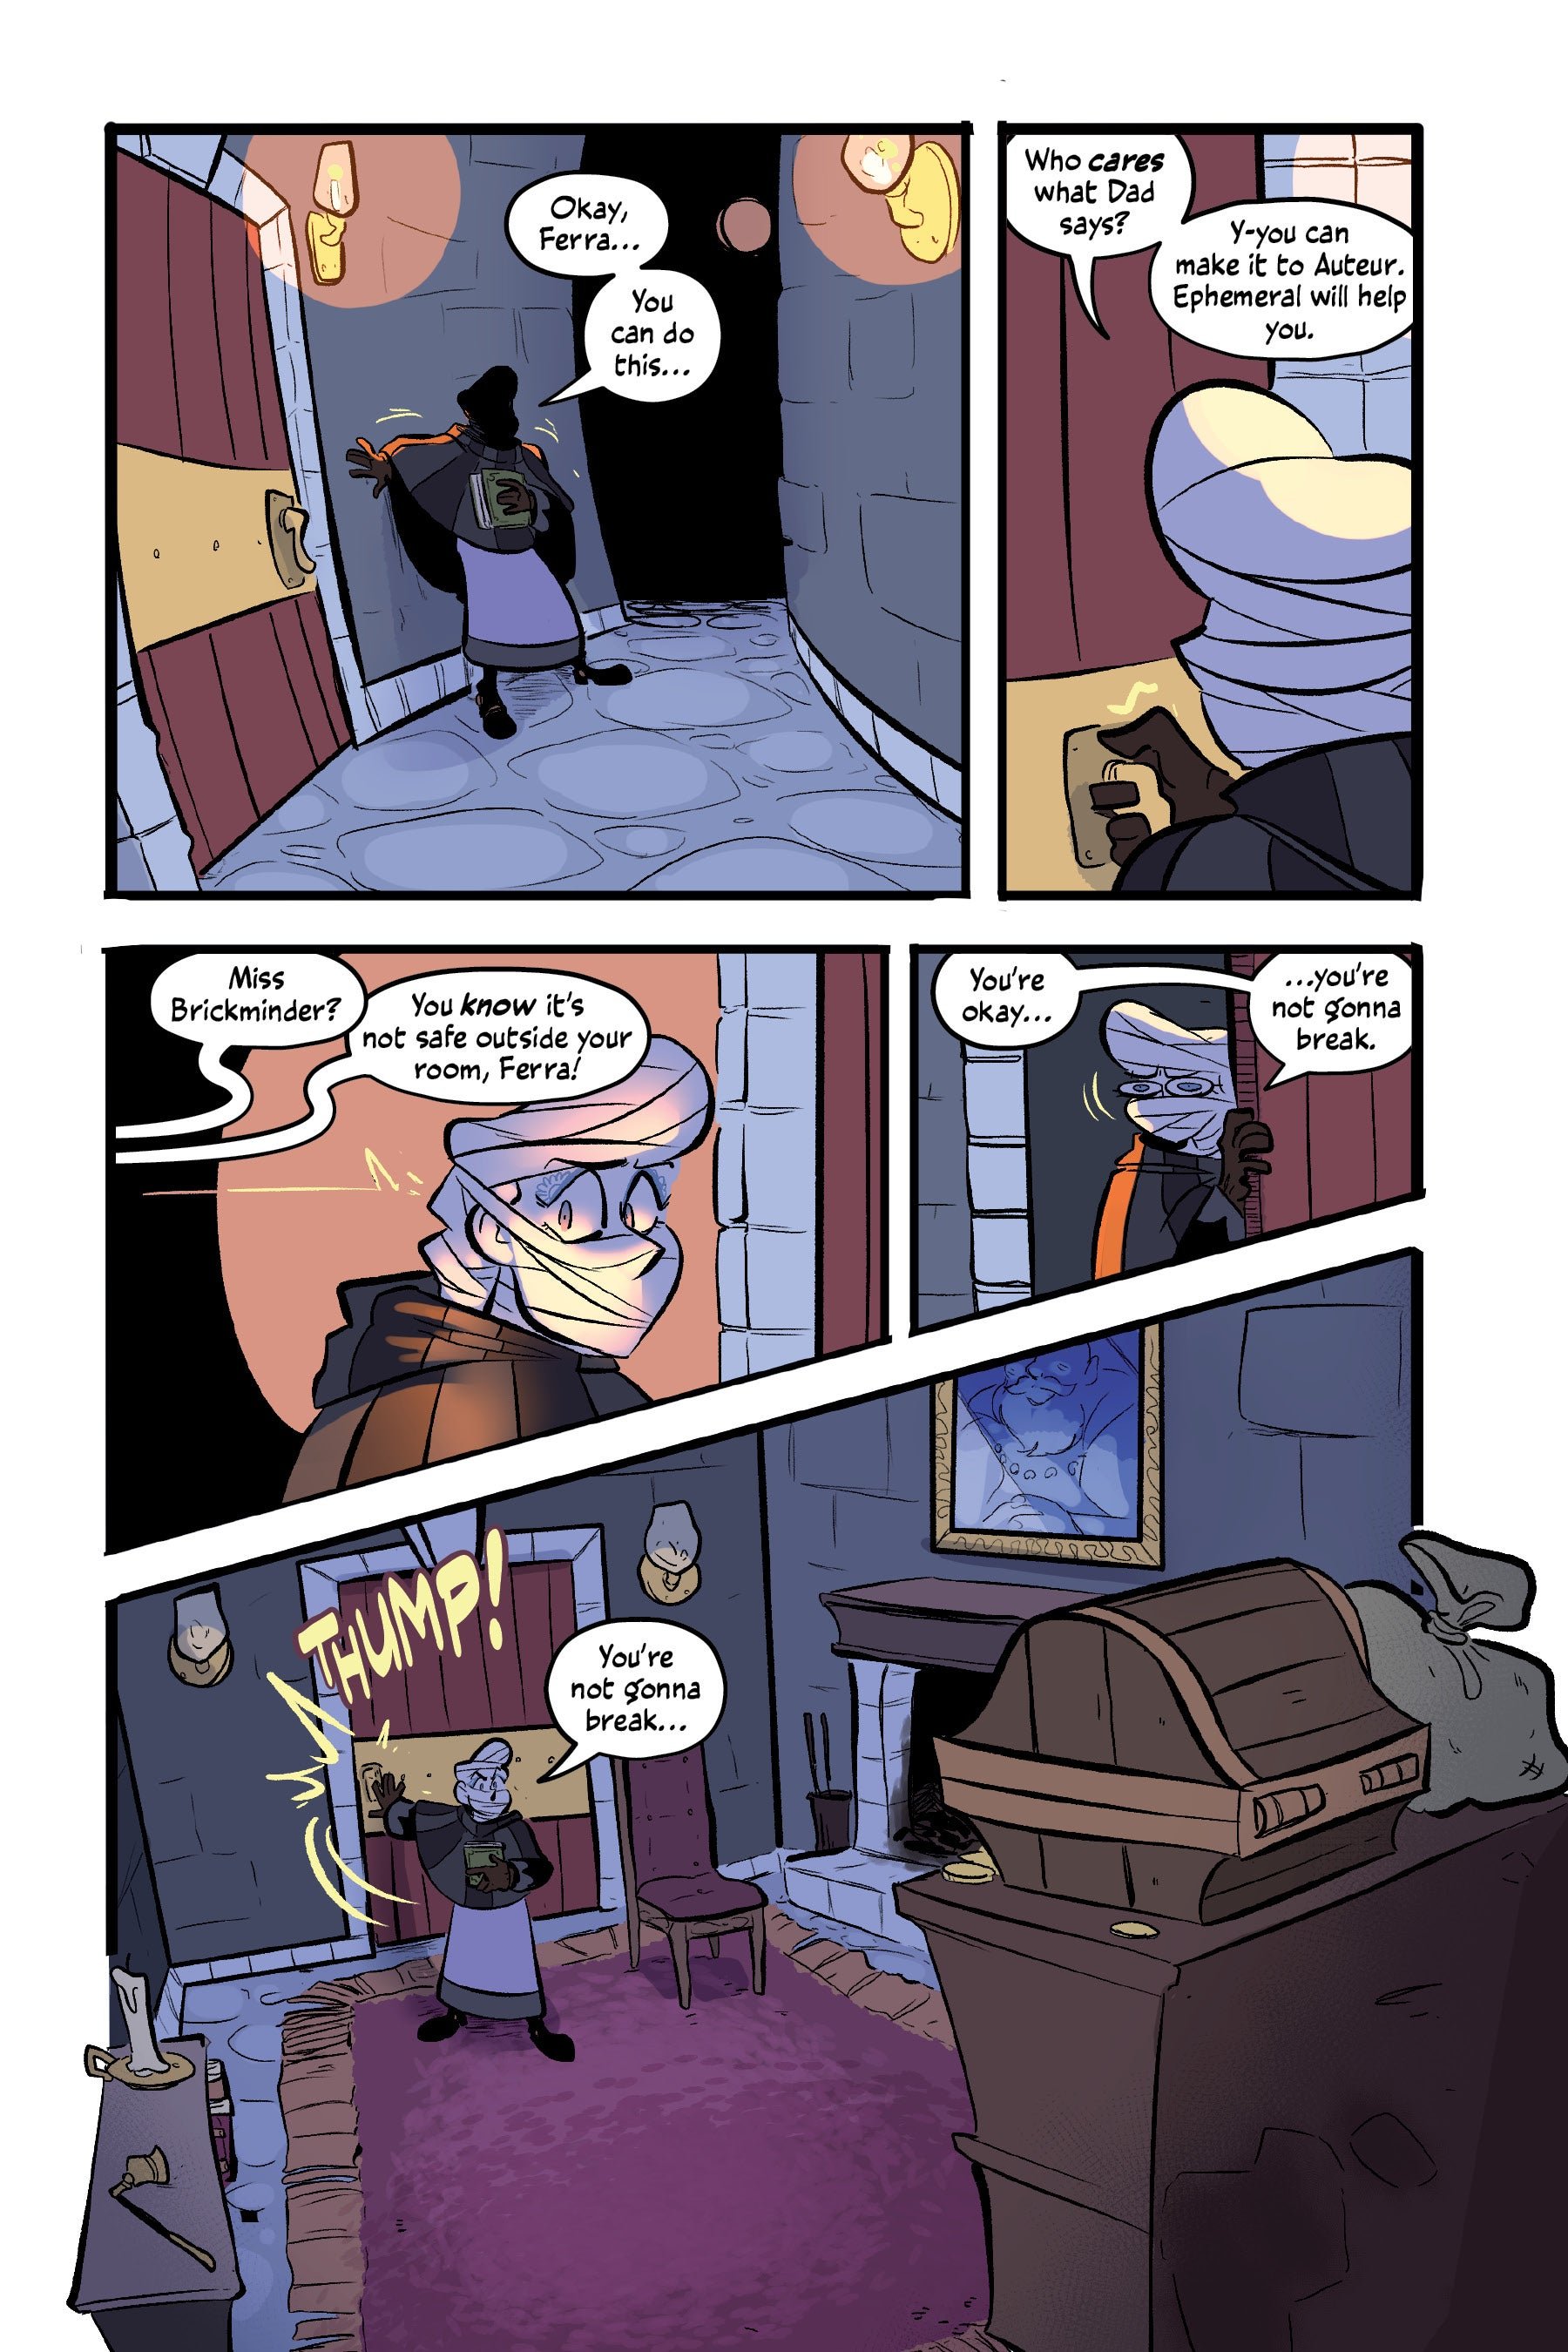 Internal comics page from The Pirate and the Porcelain Girl